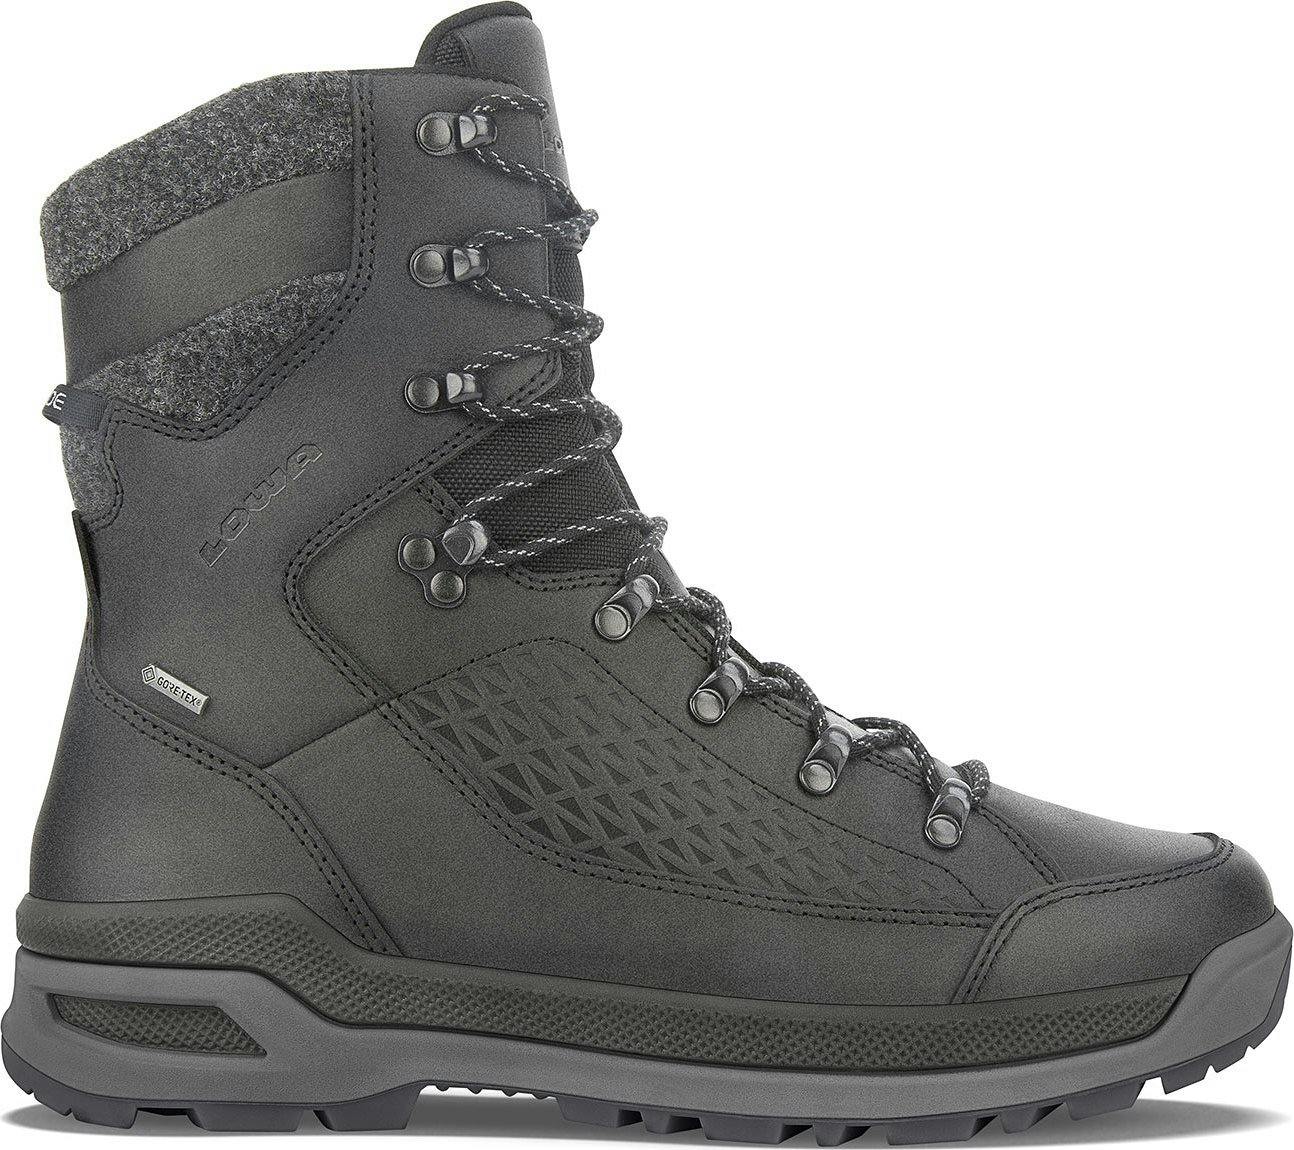 Product image for Renegade Evo Ice GTX Hiking Boot - Men's